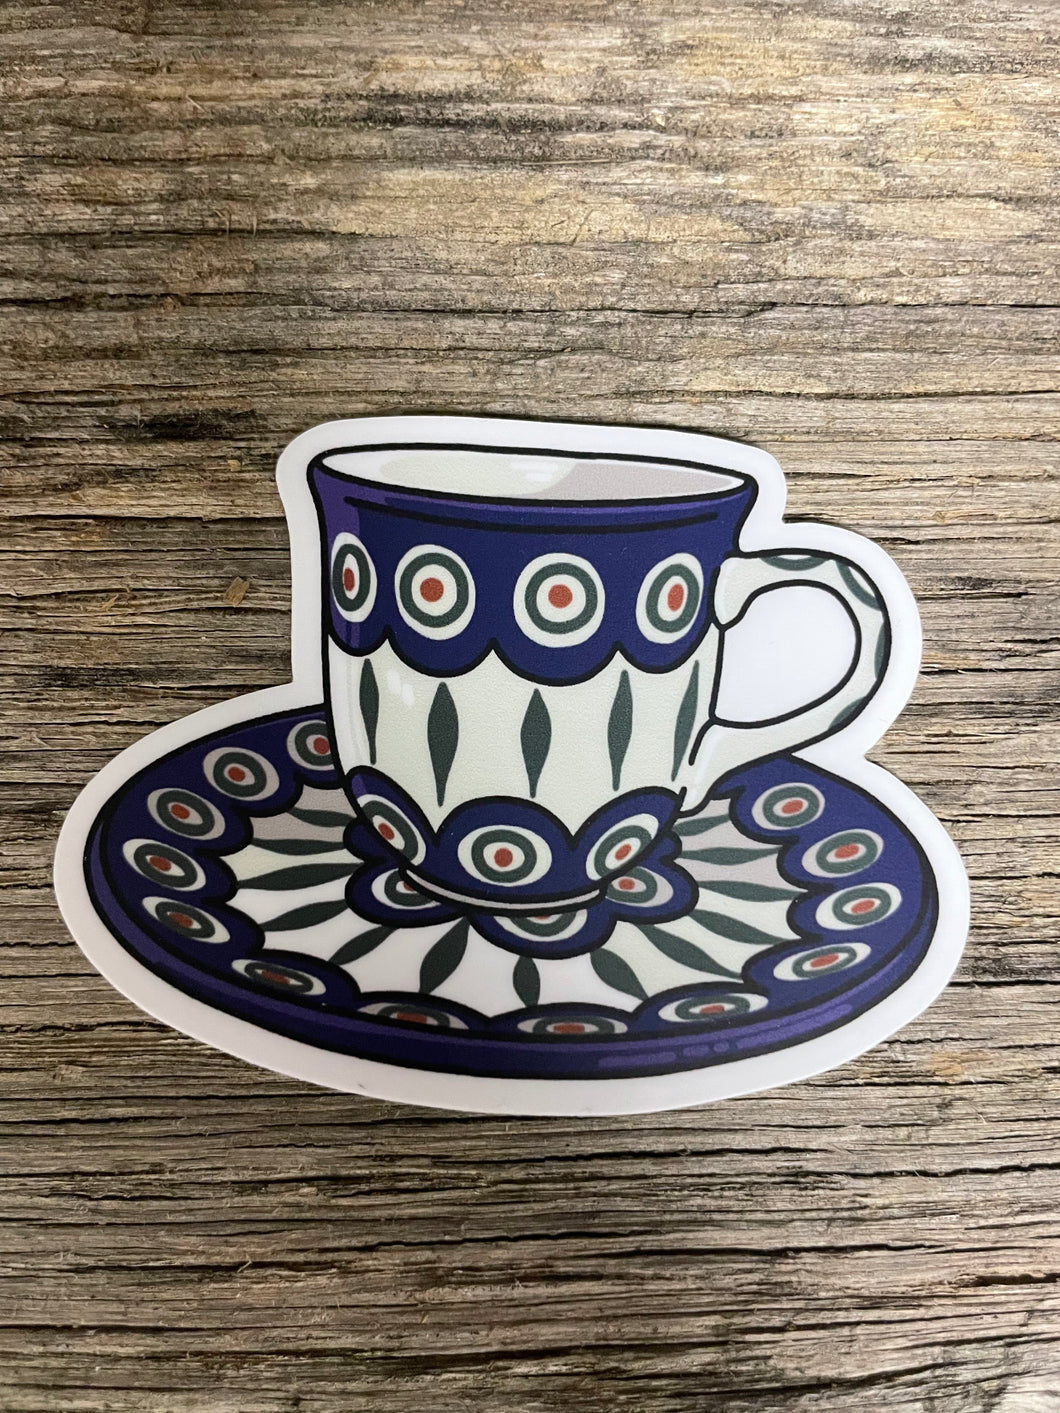 Sticker by Birdy, Peacock Teacup